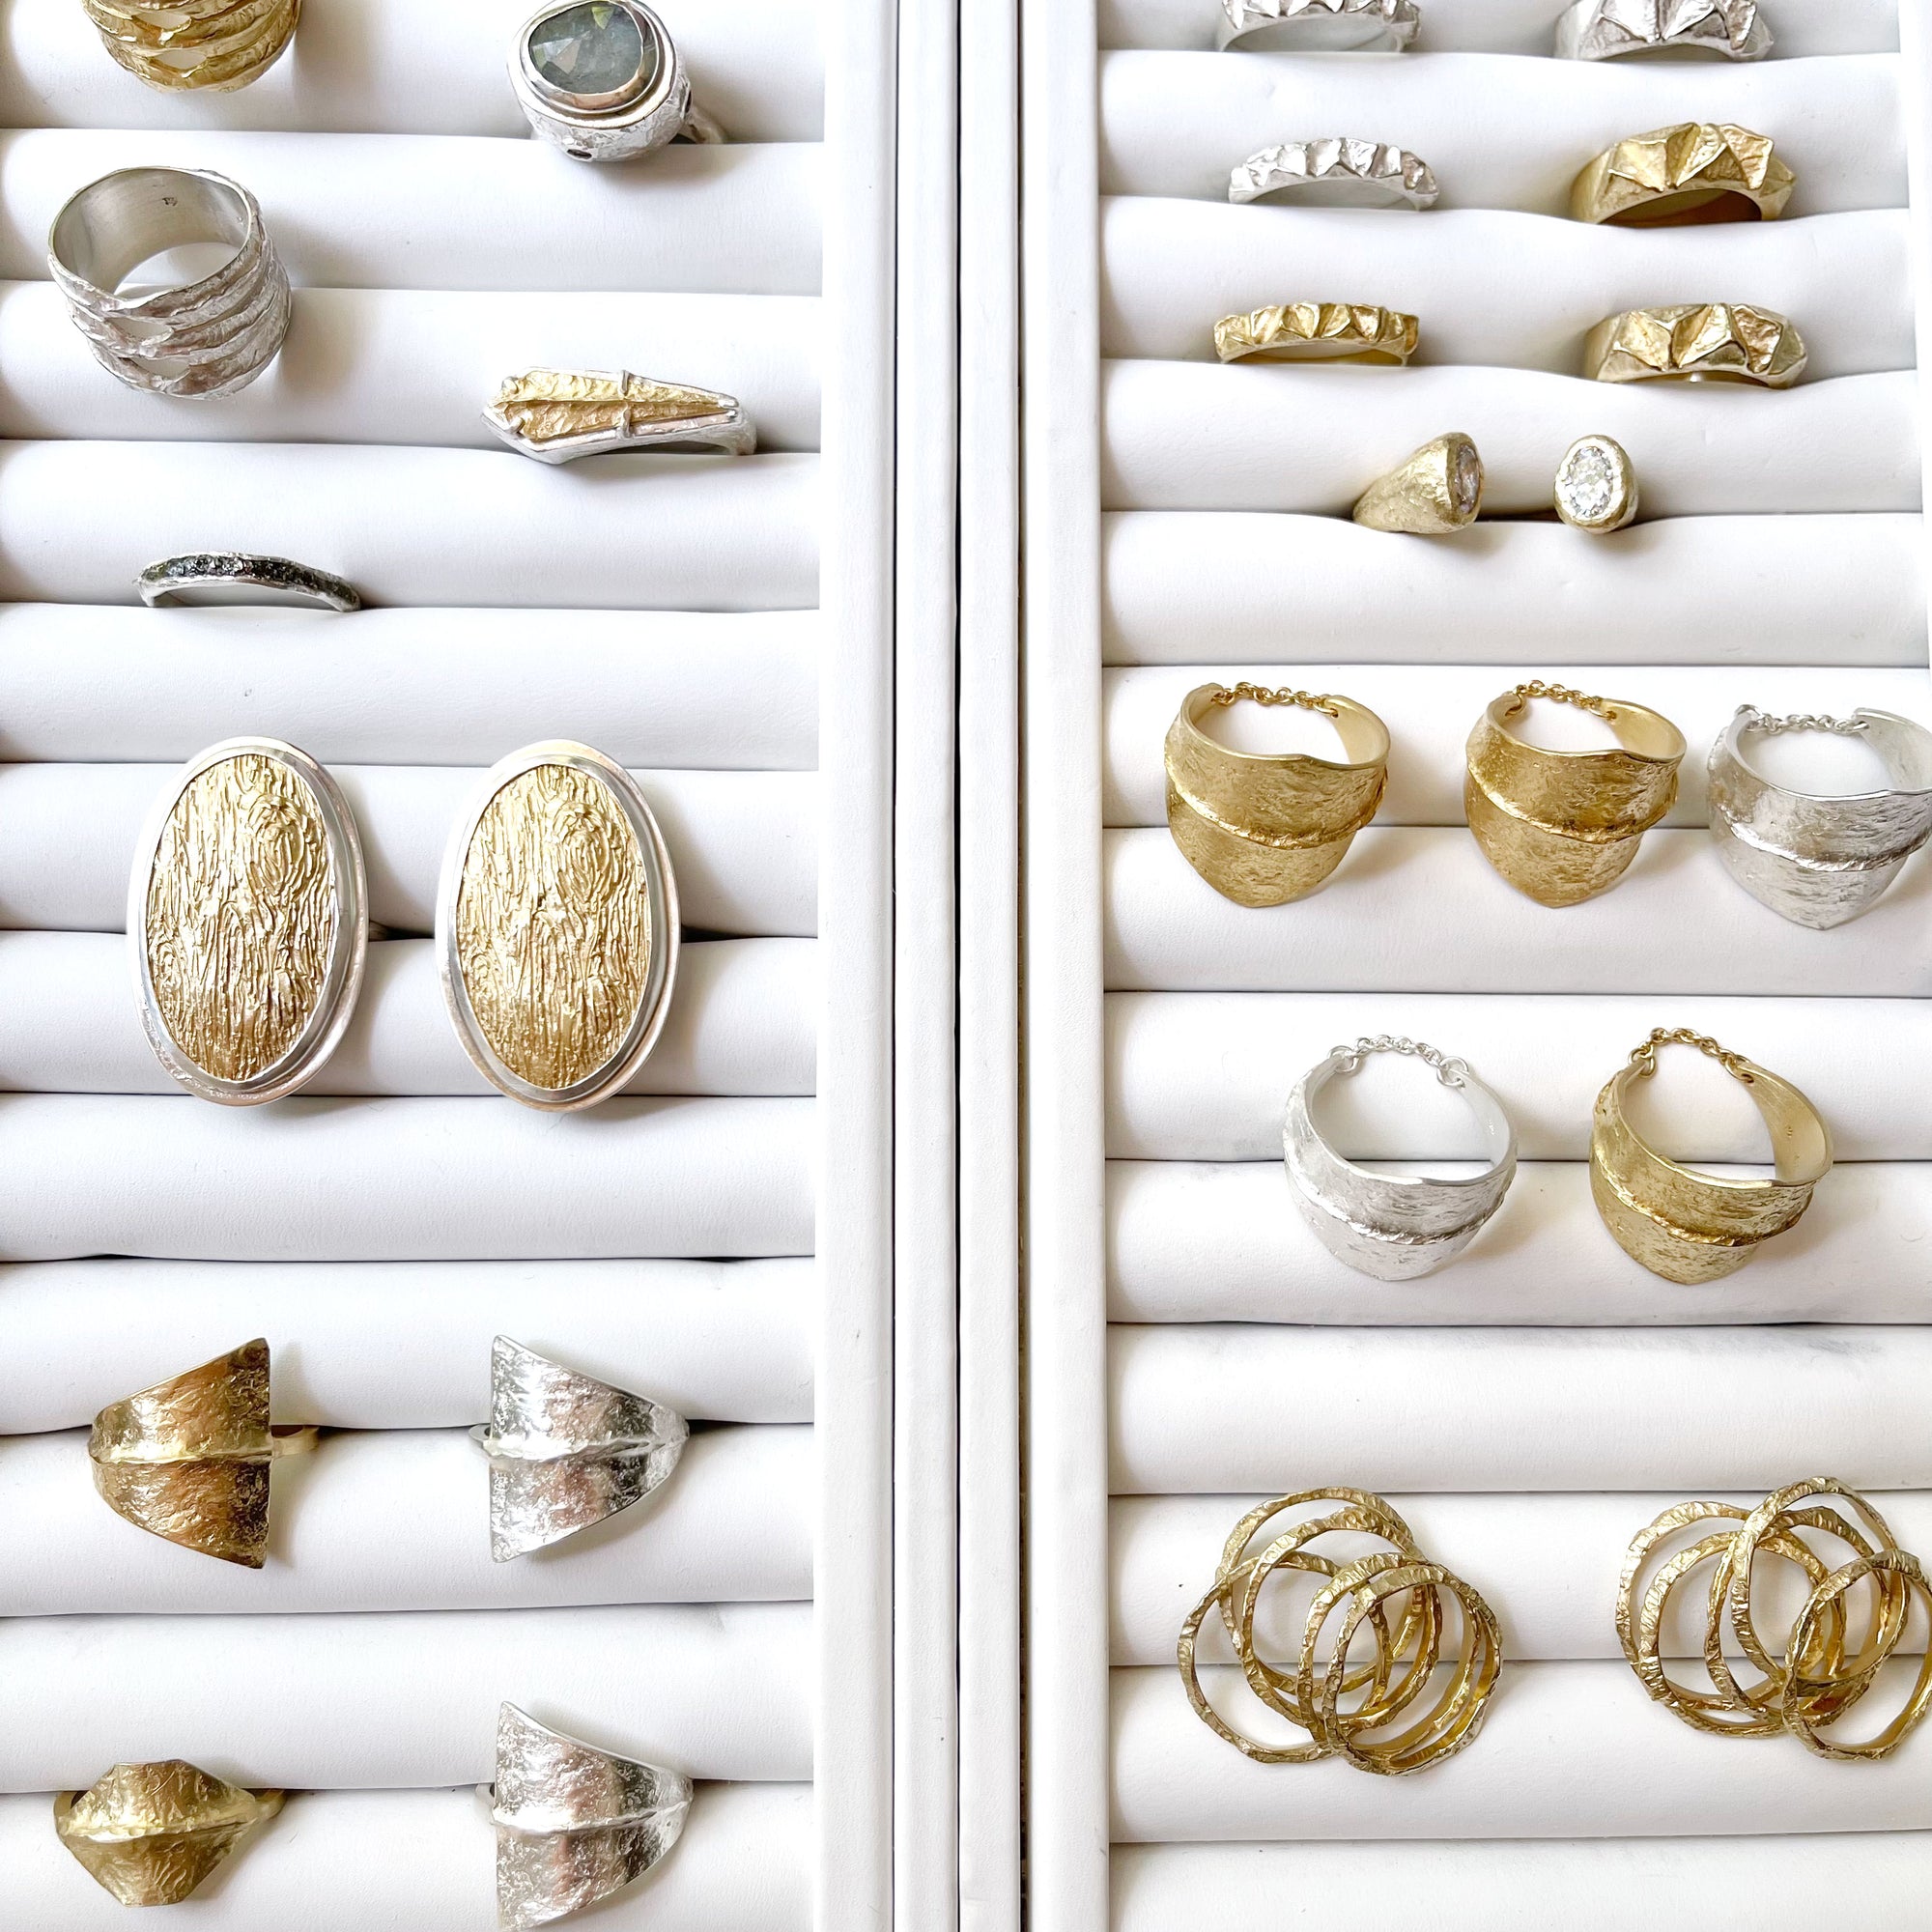 Discontinued Silver & Vermeil Rings!